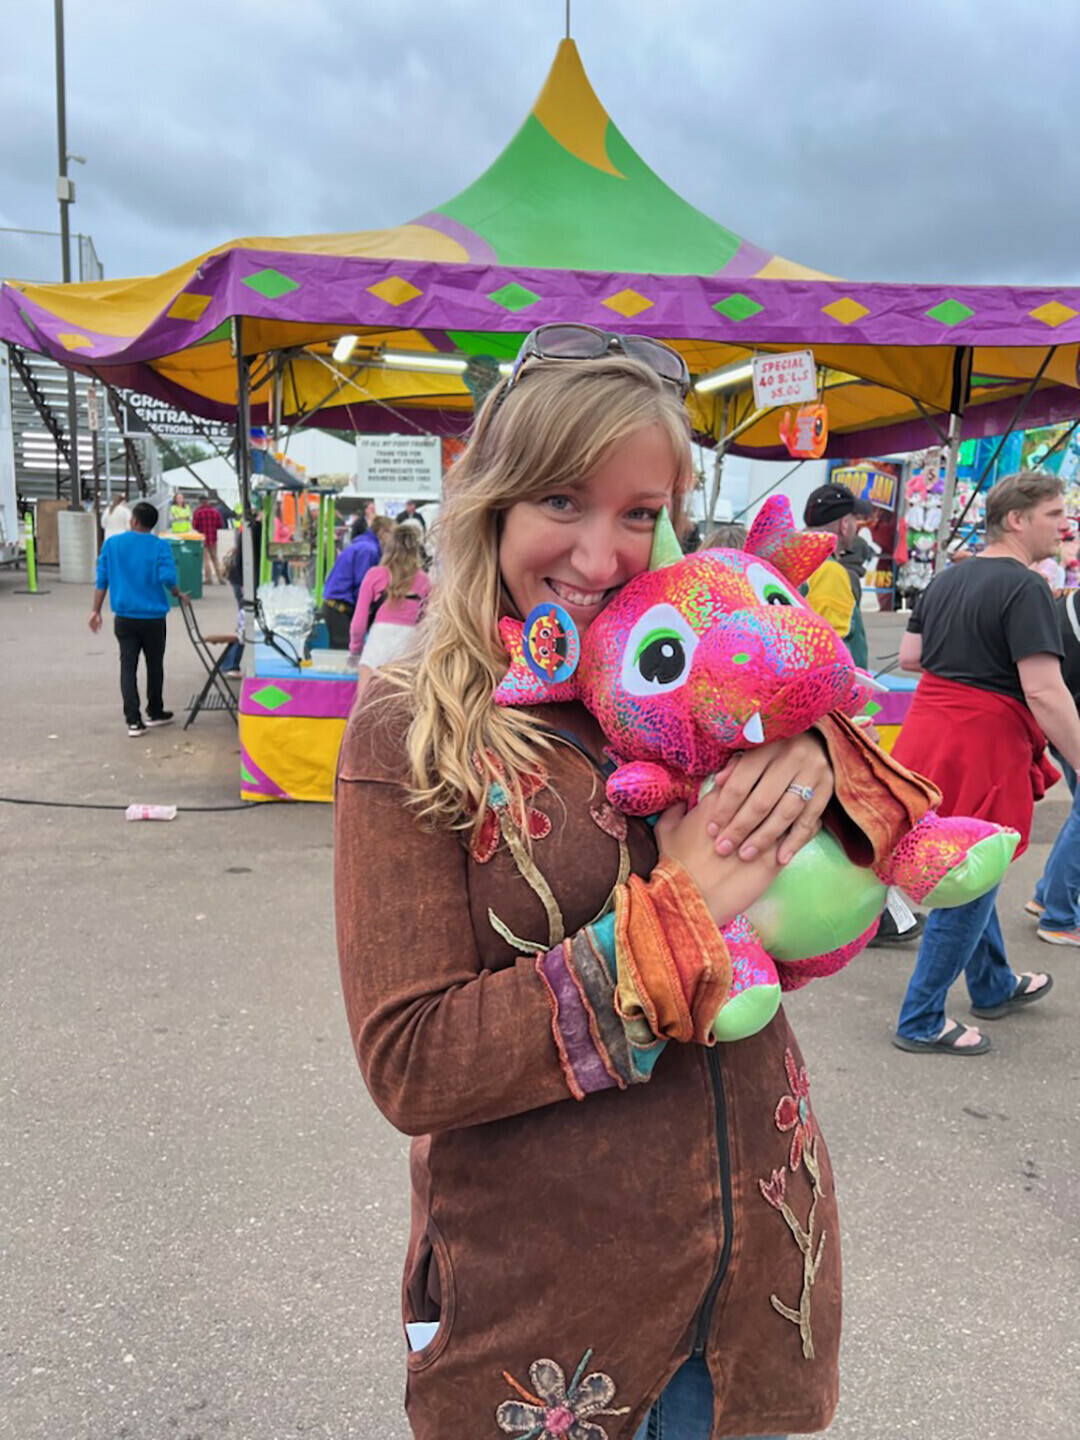 The writer finding success at the Northern Wisconsin State Fair in Chippewa Falls.